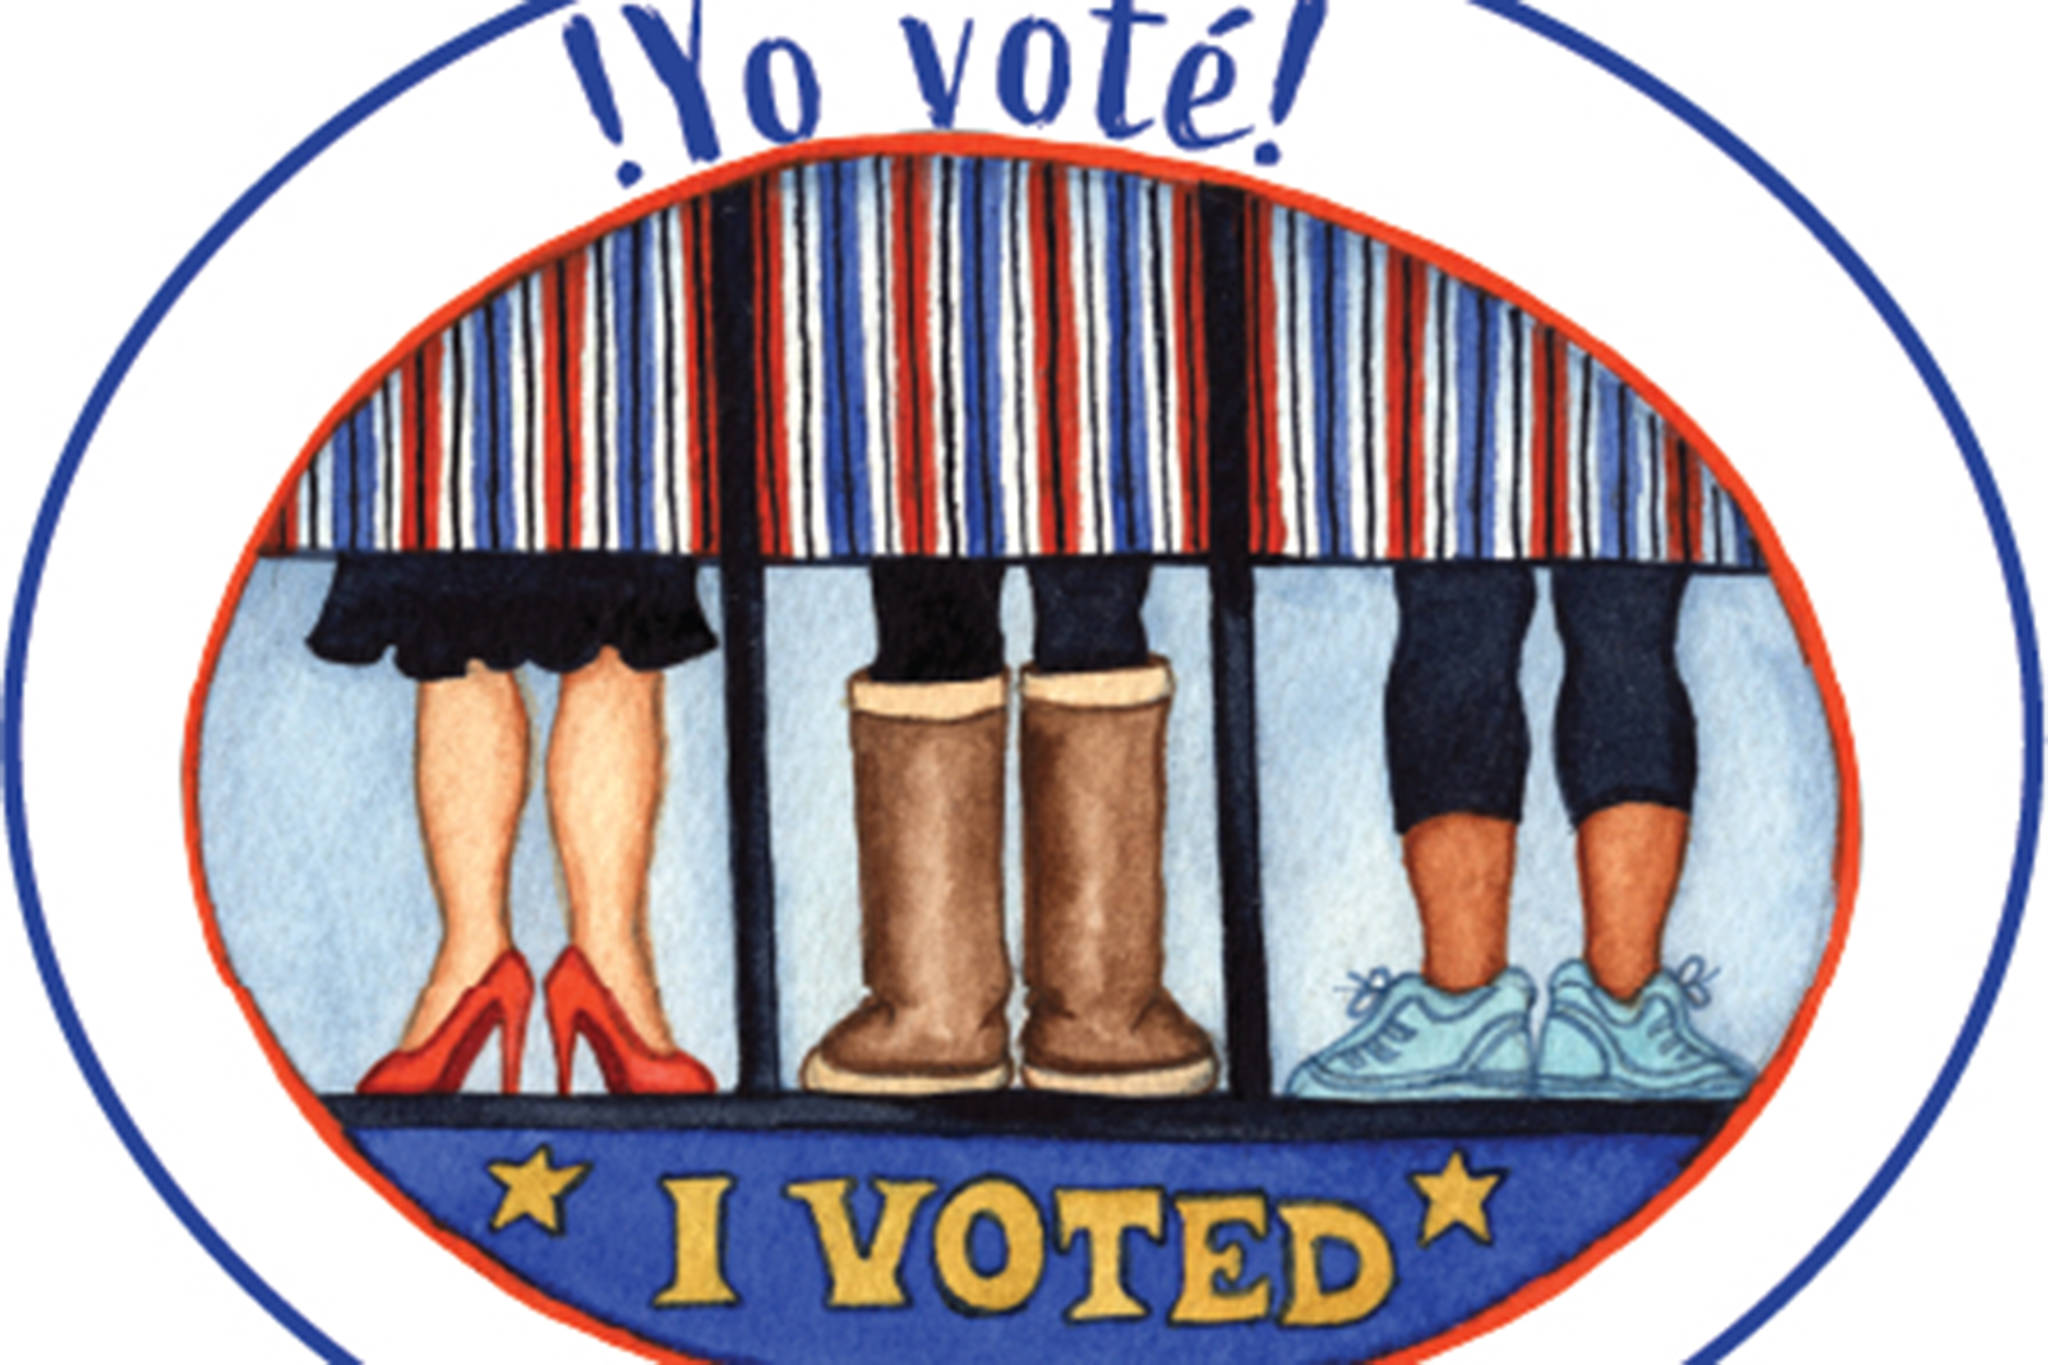 This Spanish-language “I Voted” sticker is among several designed by Alaskan artist Barbara Lavallee. The stickers will be available in English, Spanish, Koyukon, Gwich’in, Aleut, Tagalog, Alutiiq, Northern Inupiaq, Nunivak Cup’ig and Yup’ik, according to Alaska Division of Elections. (Courtesy Image / DOE)